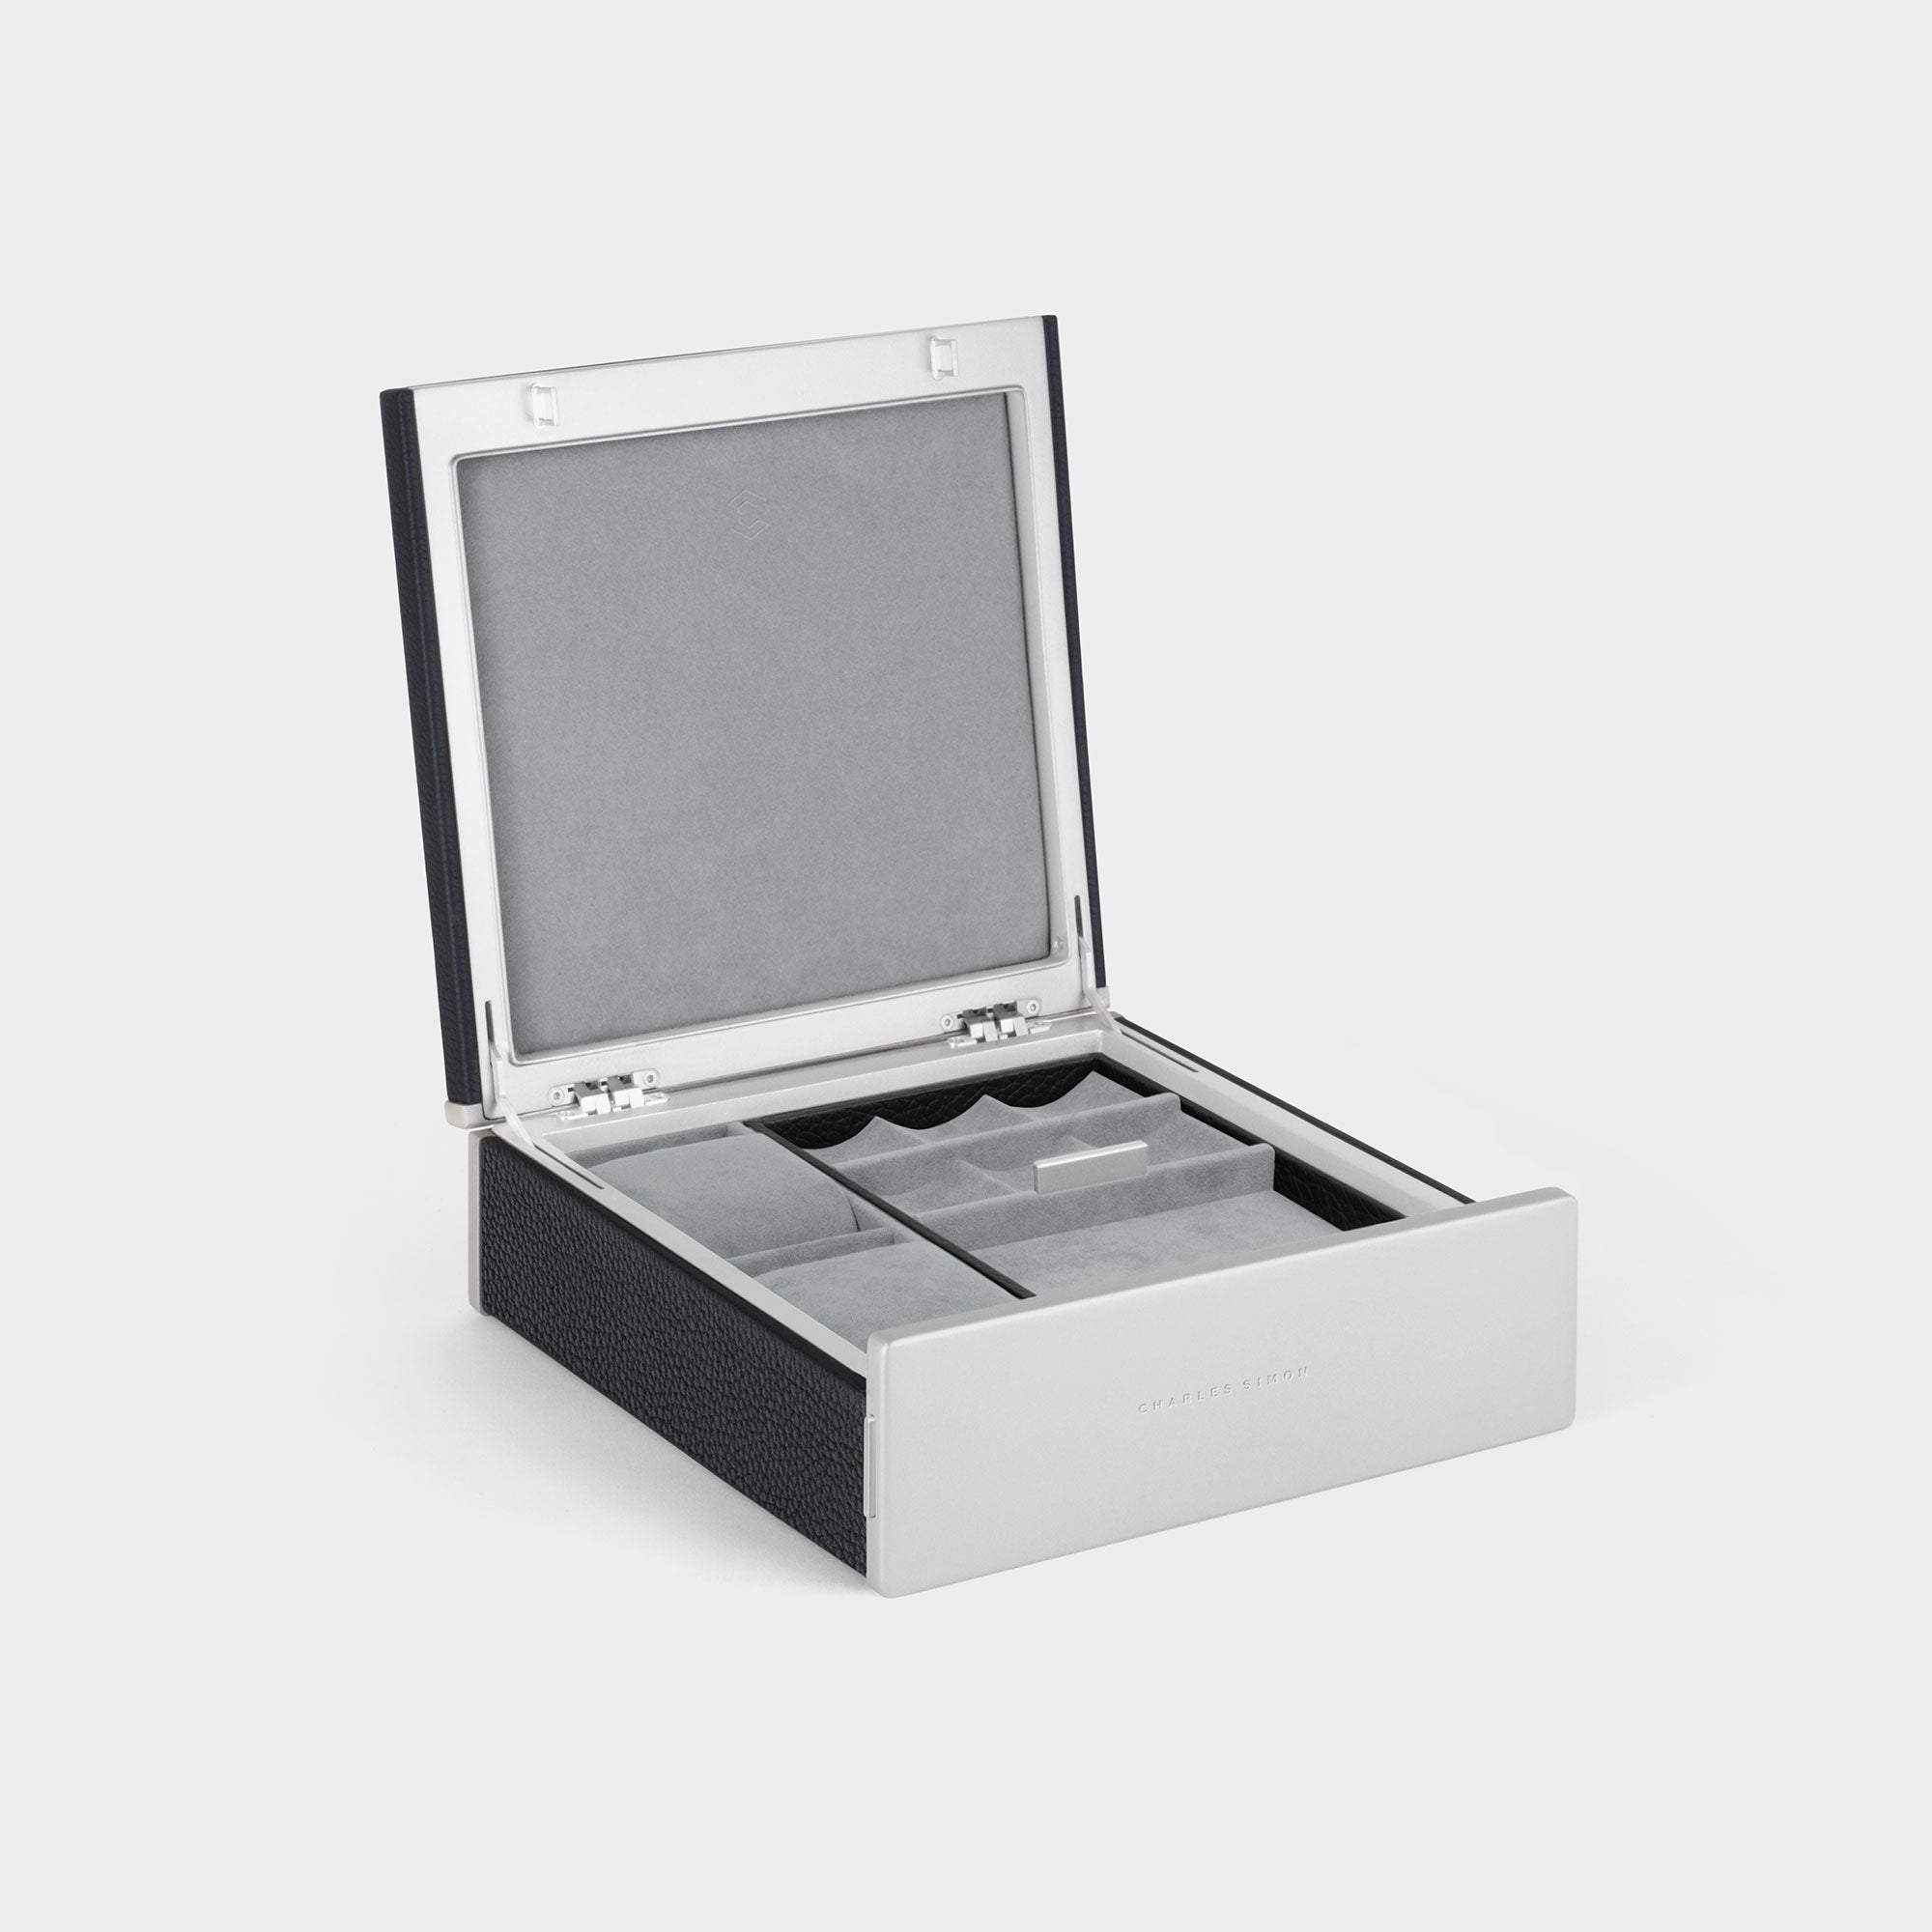 Product photo of open Taylor 2 Watch and Jewelry box in black leather and fog grey interior showing jewelry storage compartments and two watch cushions